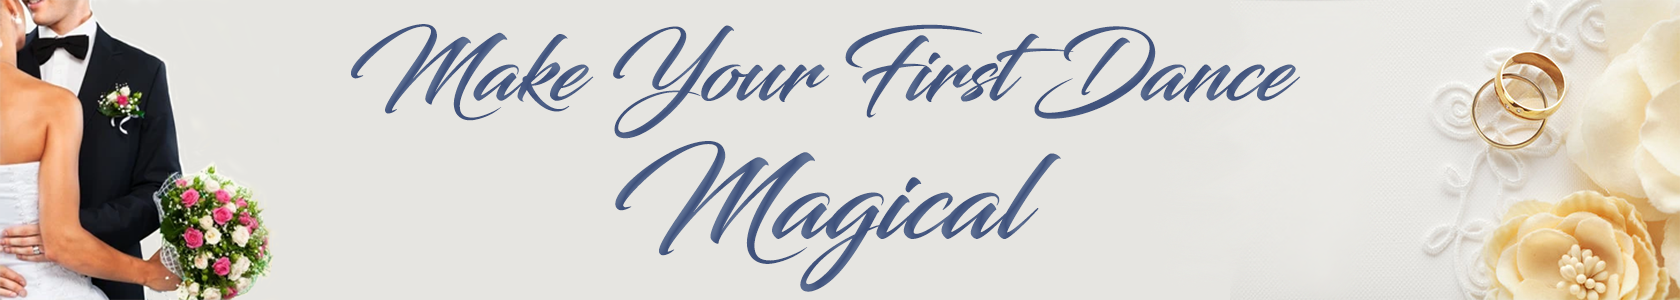 Make Your First Dance Magical